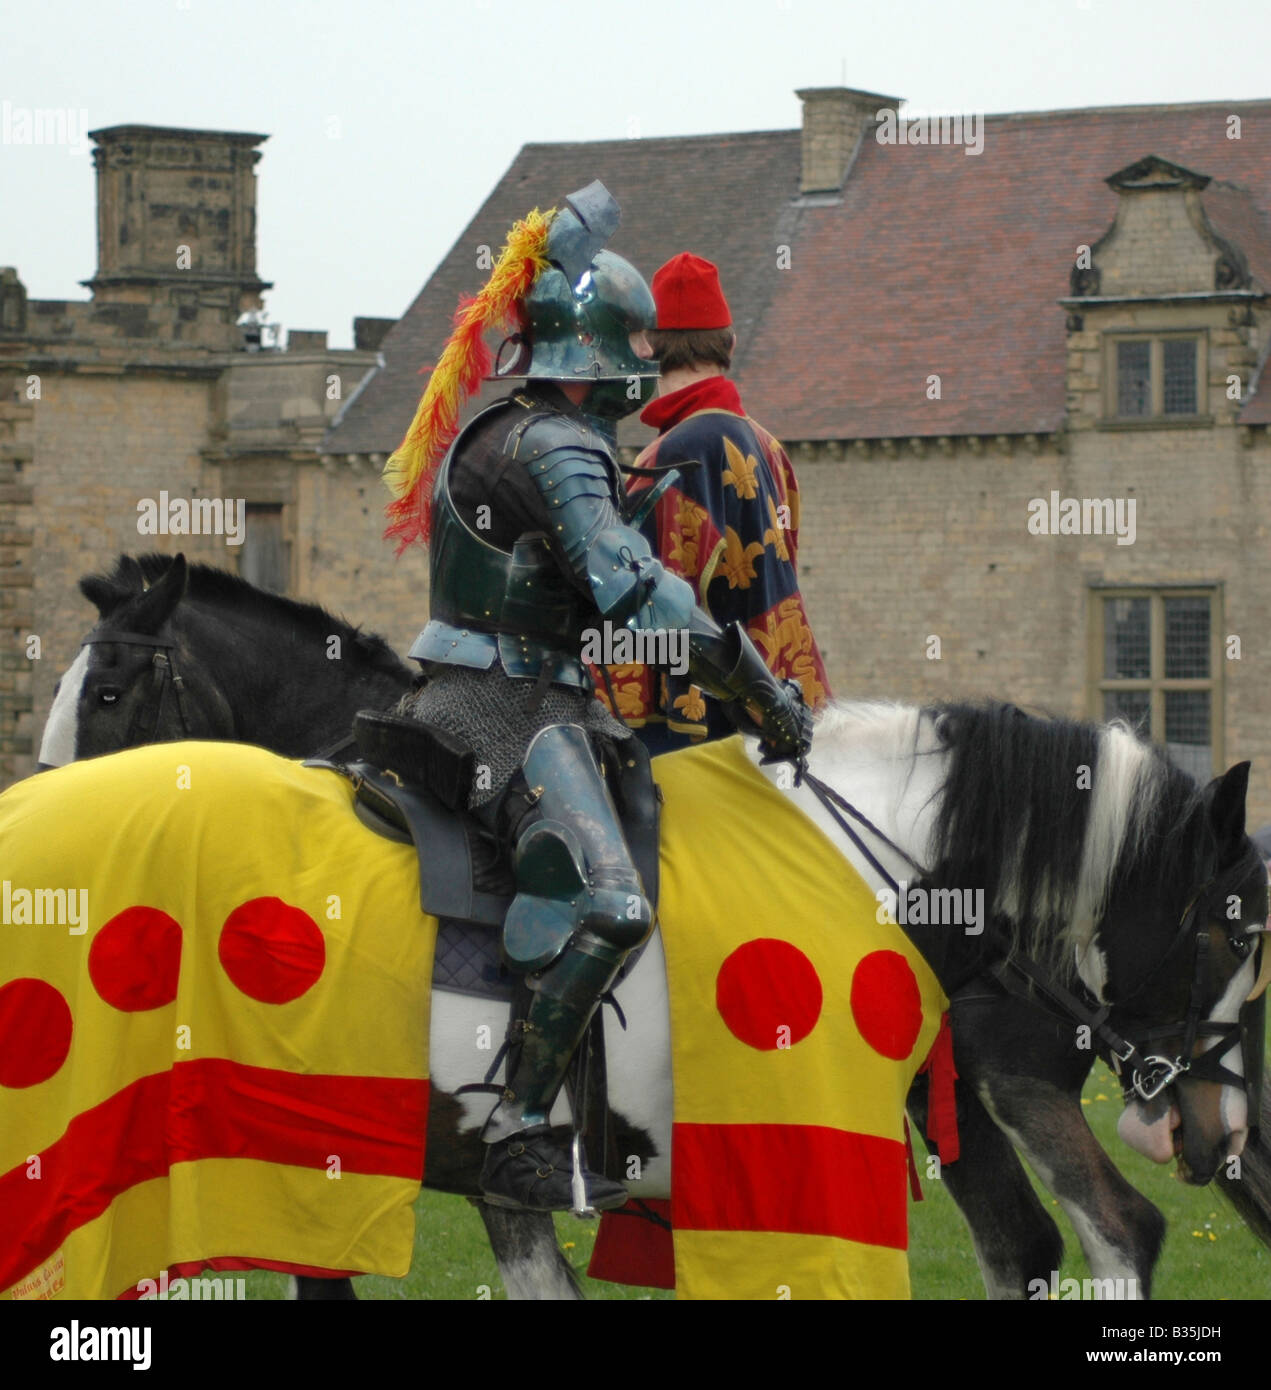 Mounted knight with squire Stock Photo